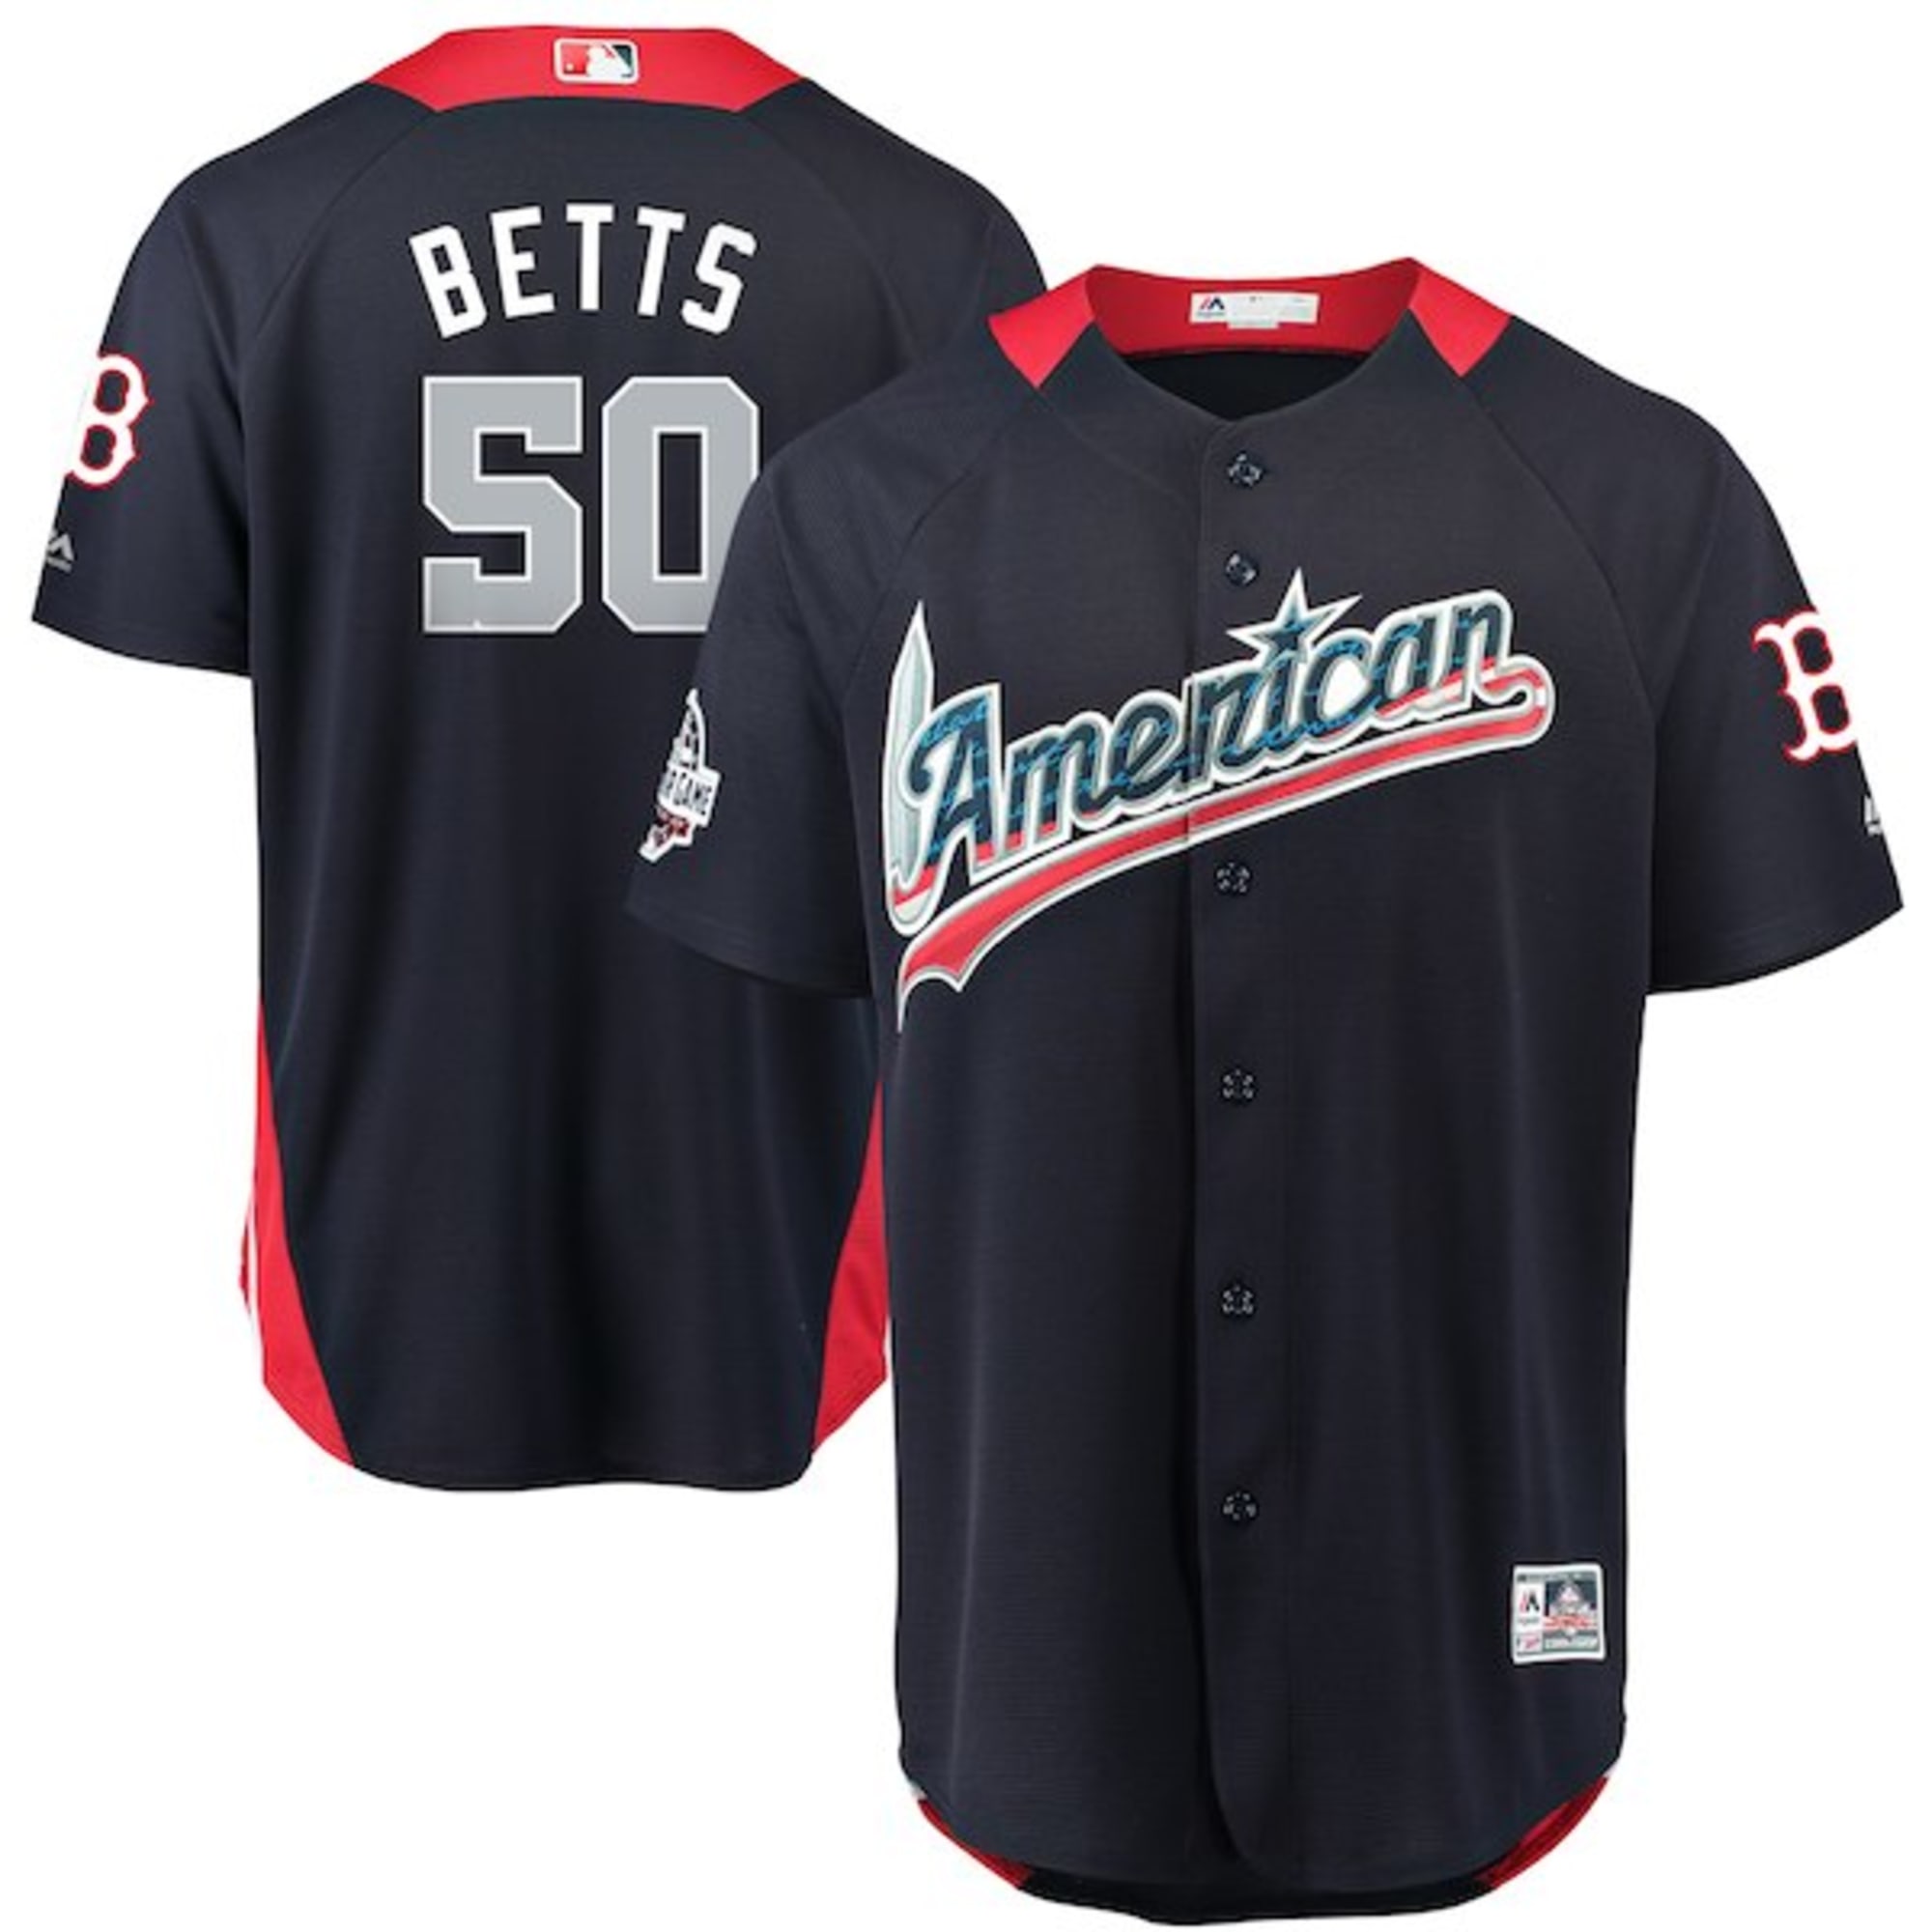 2018 all star game jersey